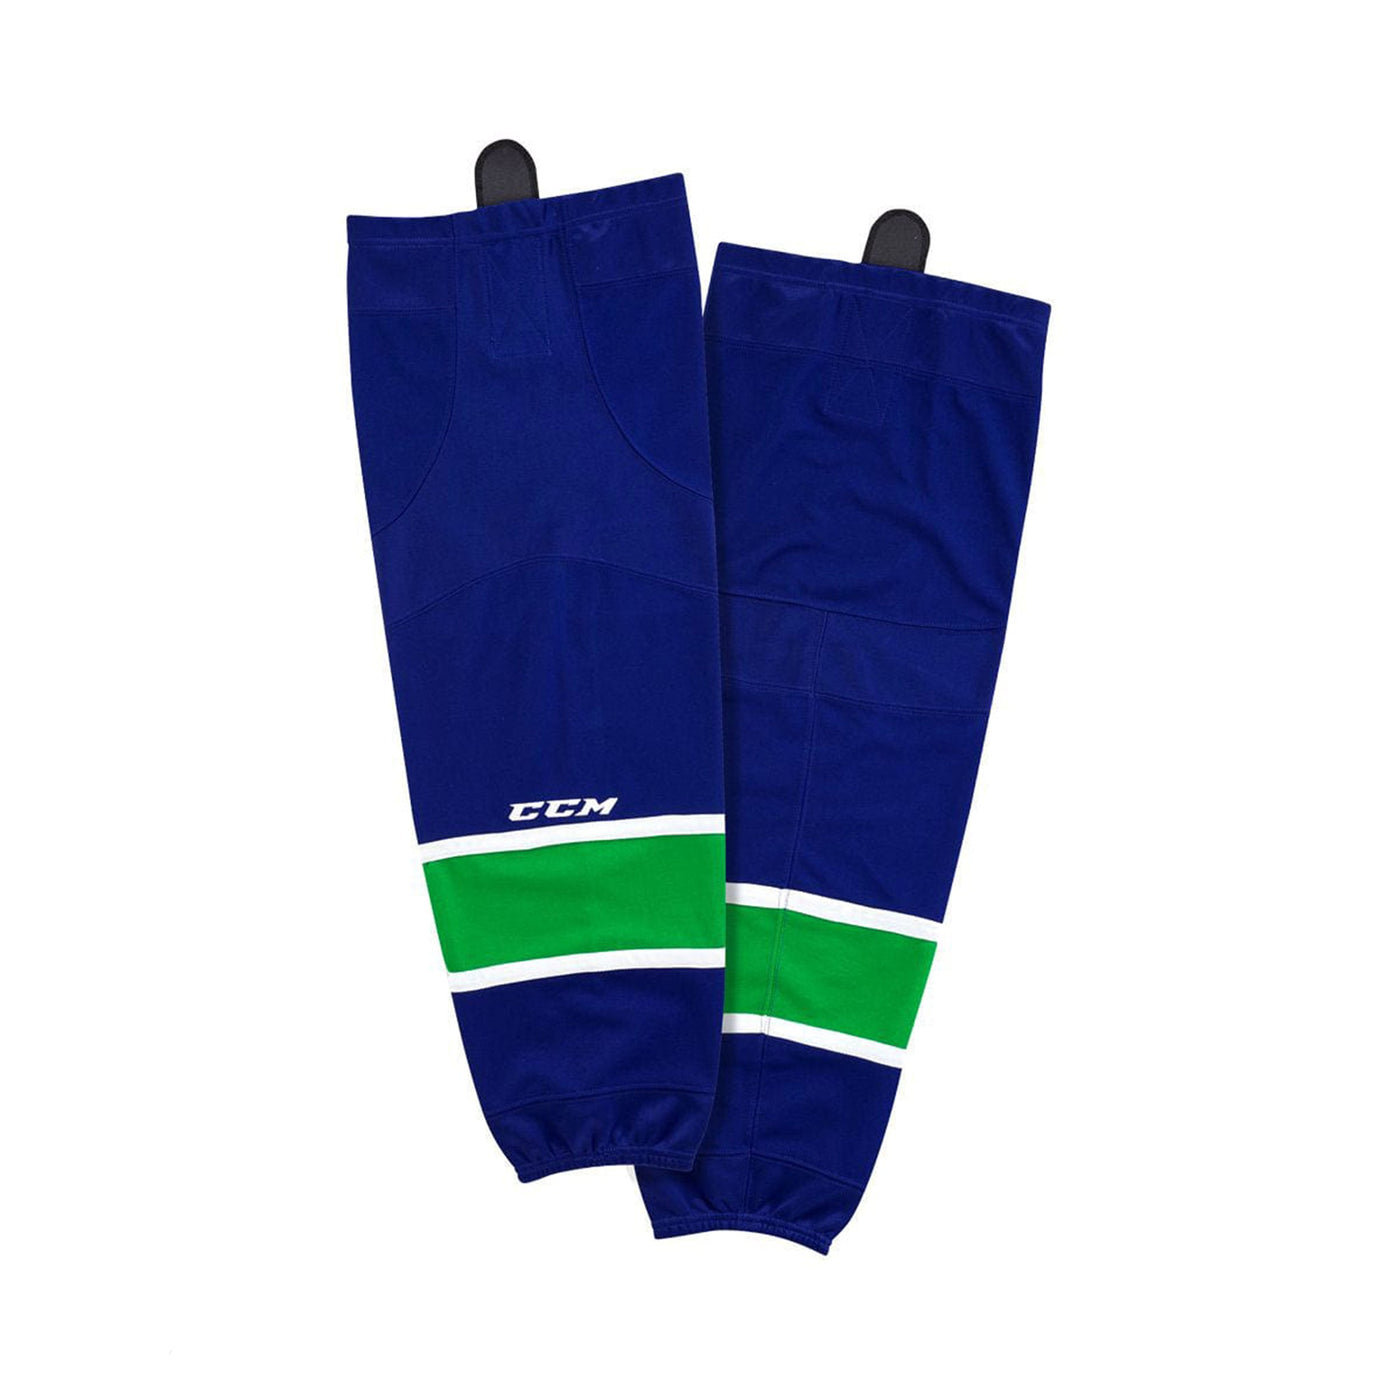 Vancouver Canucks Home CCM Quicklite 8000 Hockey Socks - The Hockey Shop Source For Sports